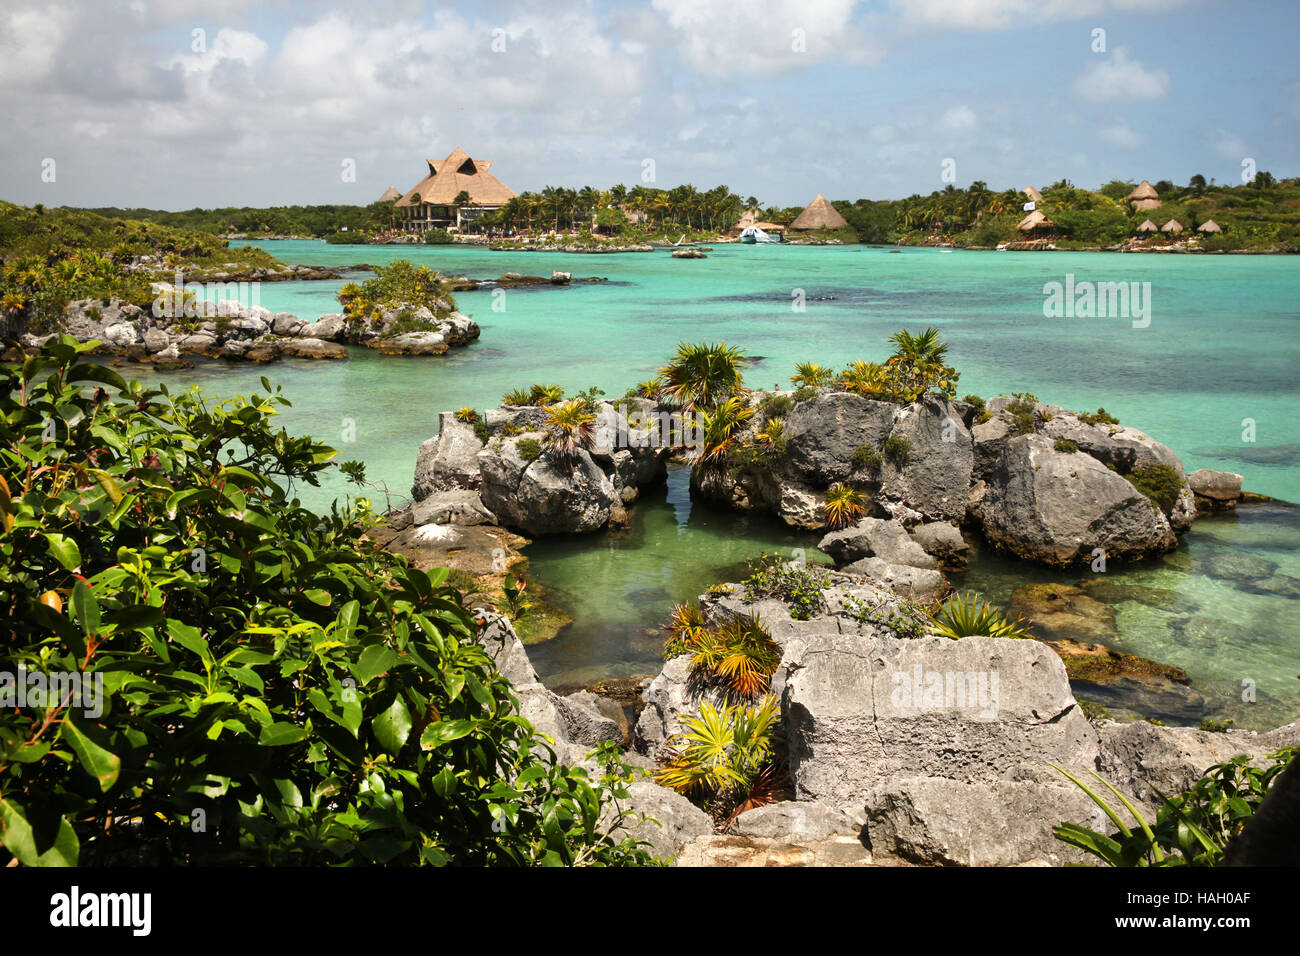 Beautiful bay with turquoise waters & rocky coastline of Xel Ha, Mexico Stock Photo